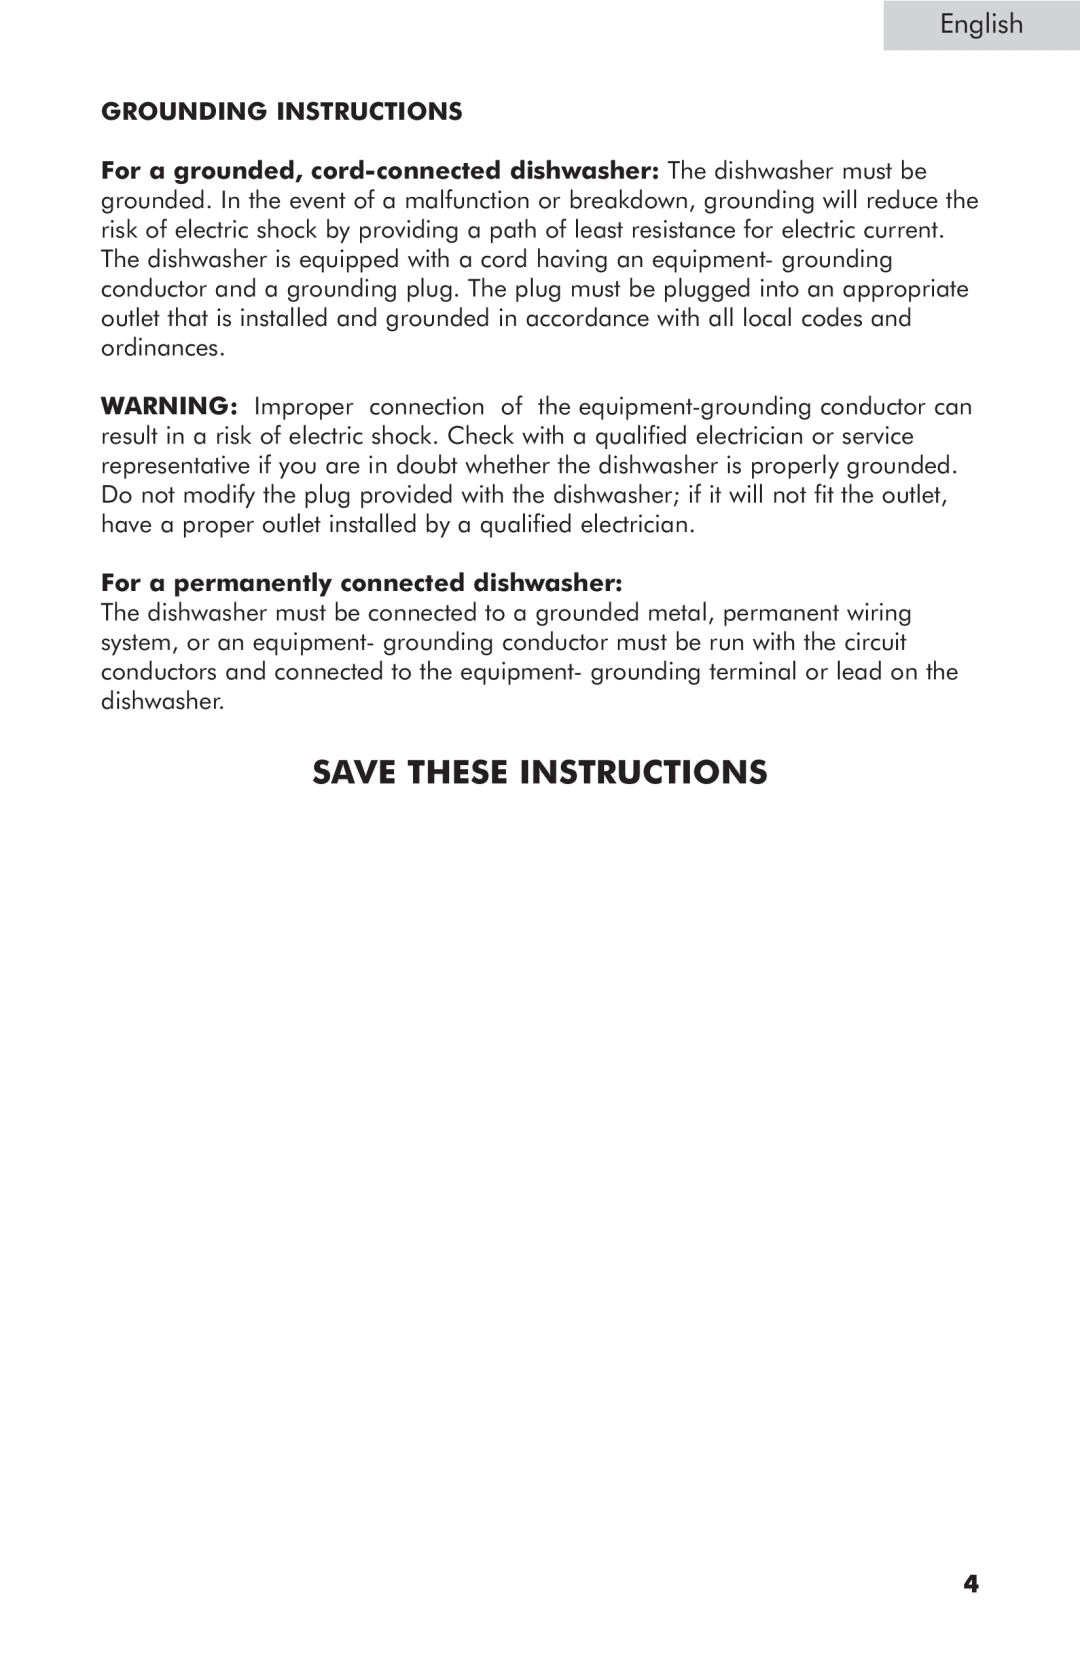 Haier ESD400, ESD402 Grounding Instructions, For a permanently connected dishwasher, Save These Instructions, English 